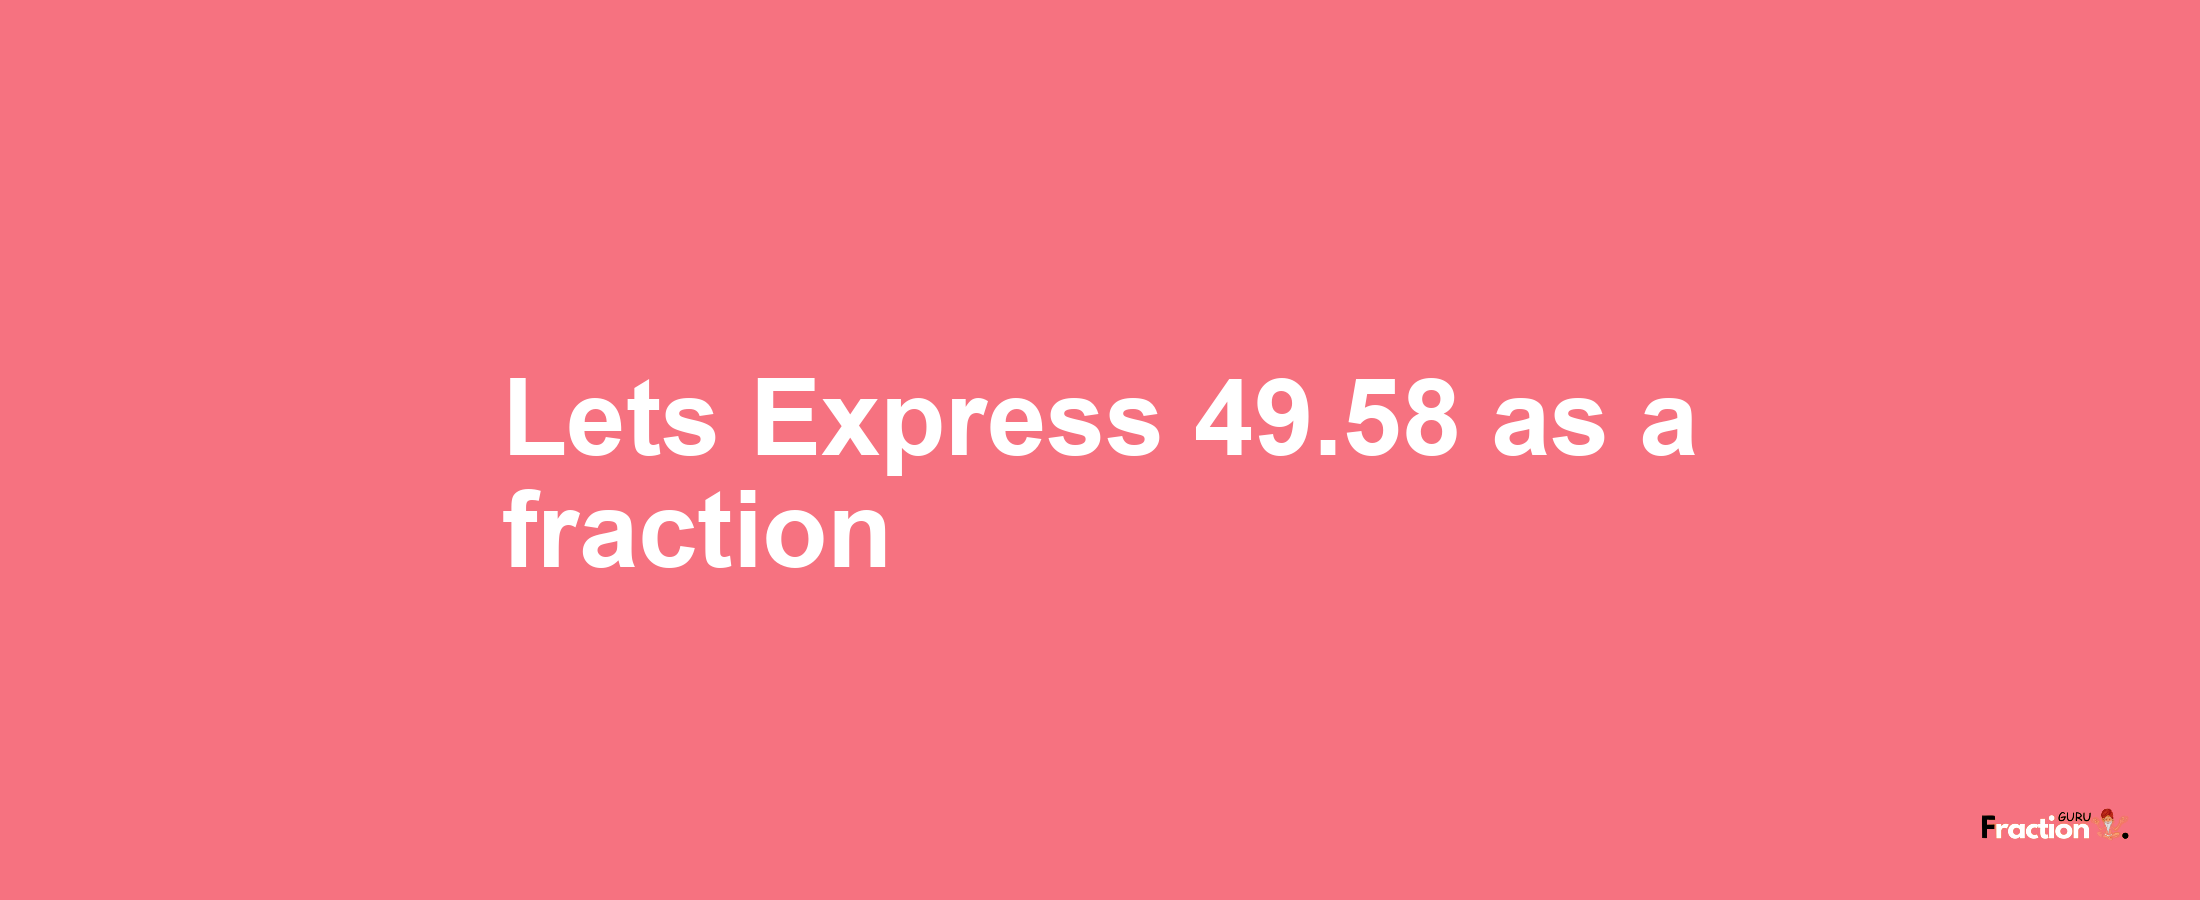 Lets Express 49.58 as afraction